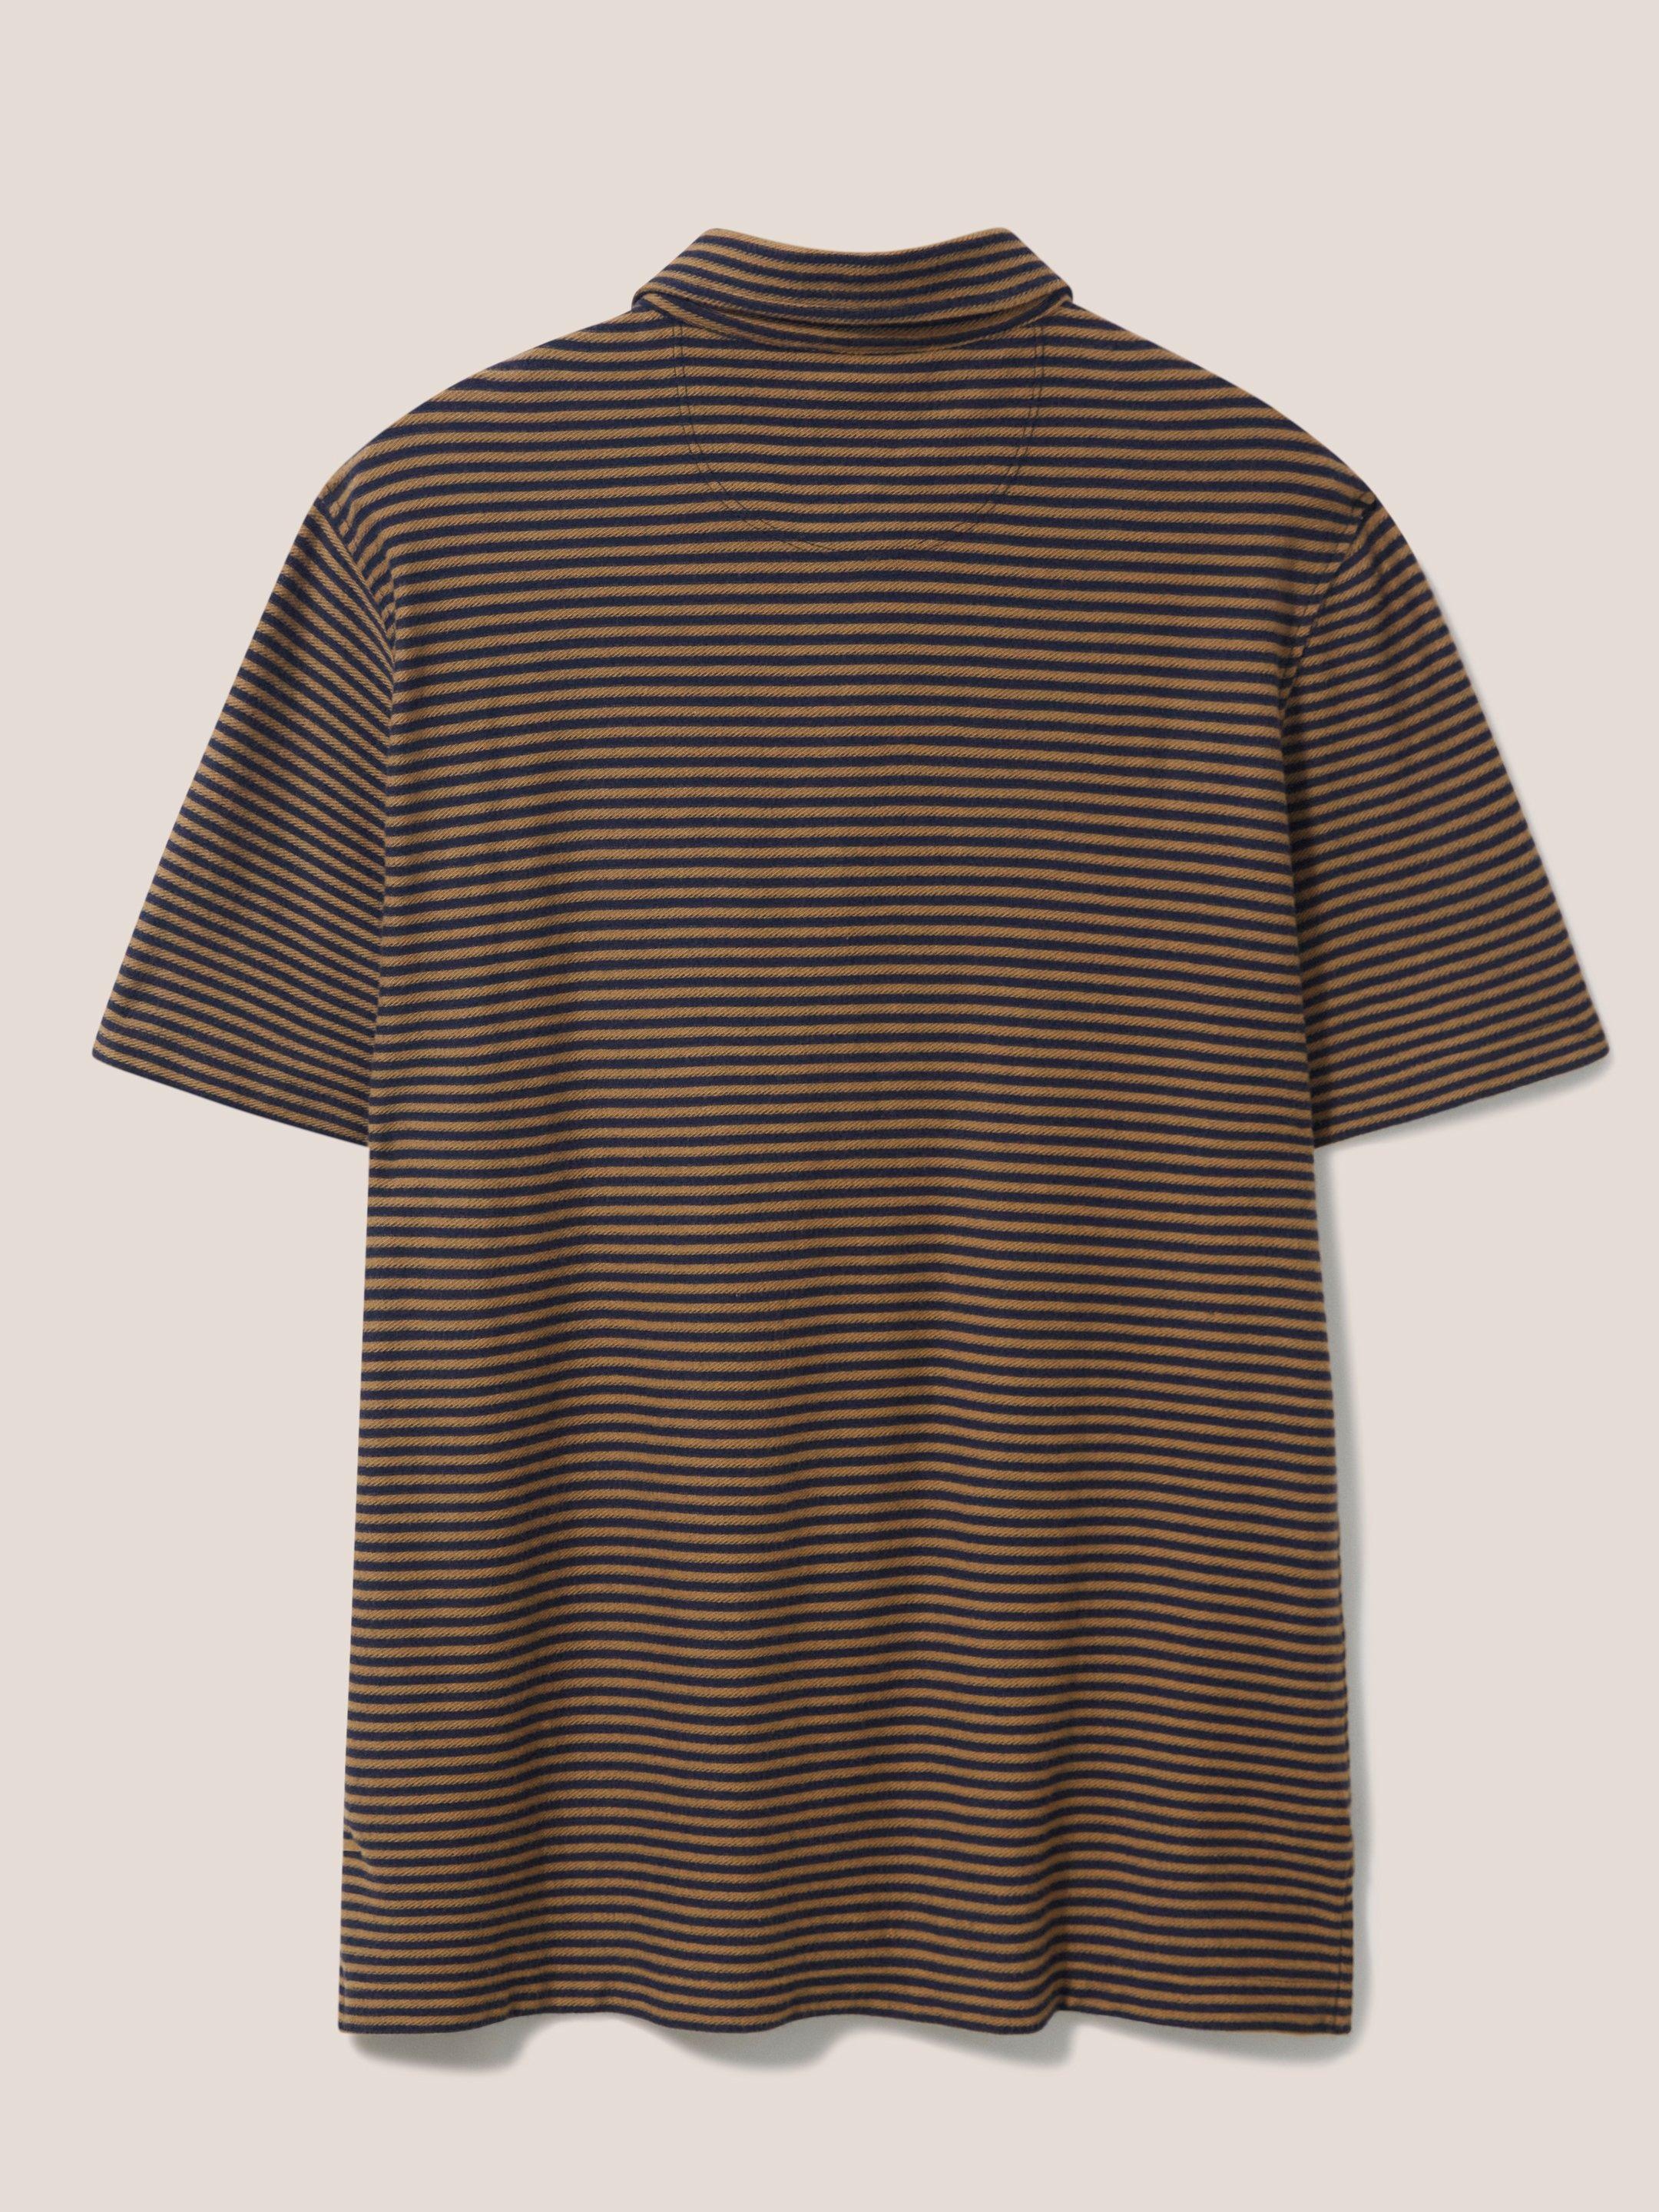 Burston Striped SS Polo in MID BROWN - FLAT BACK